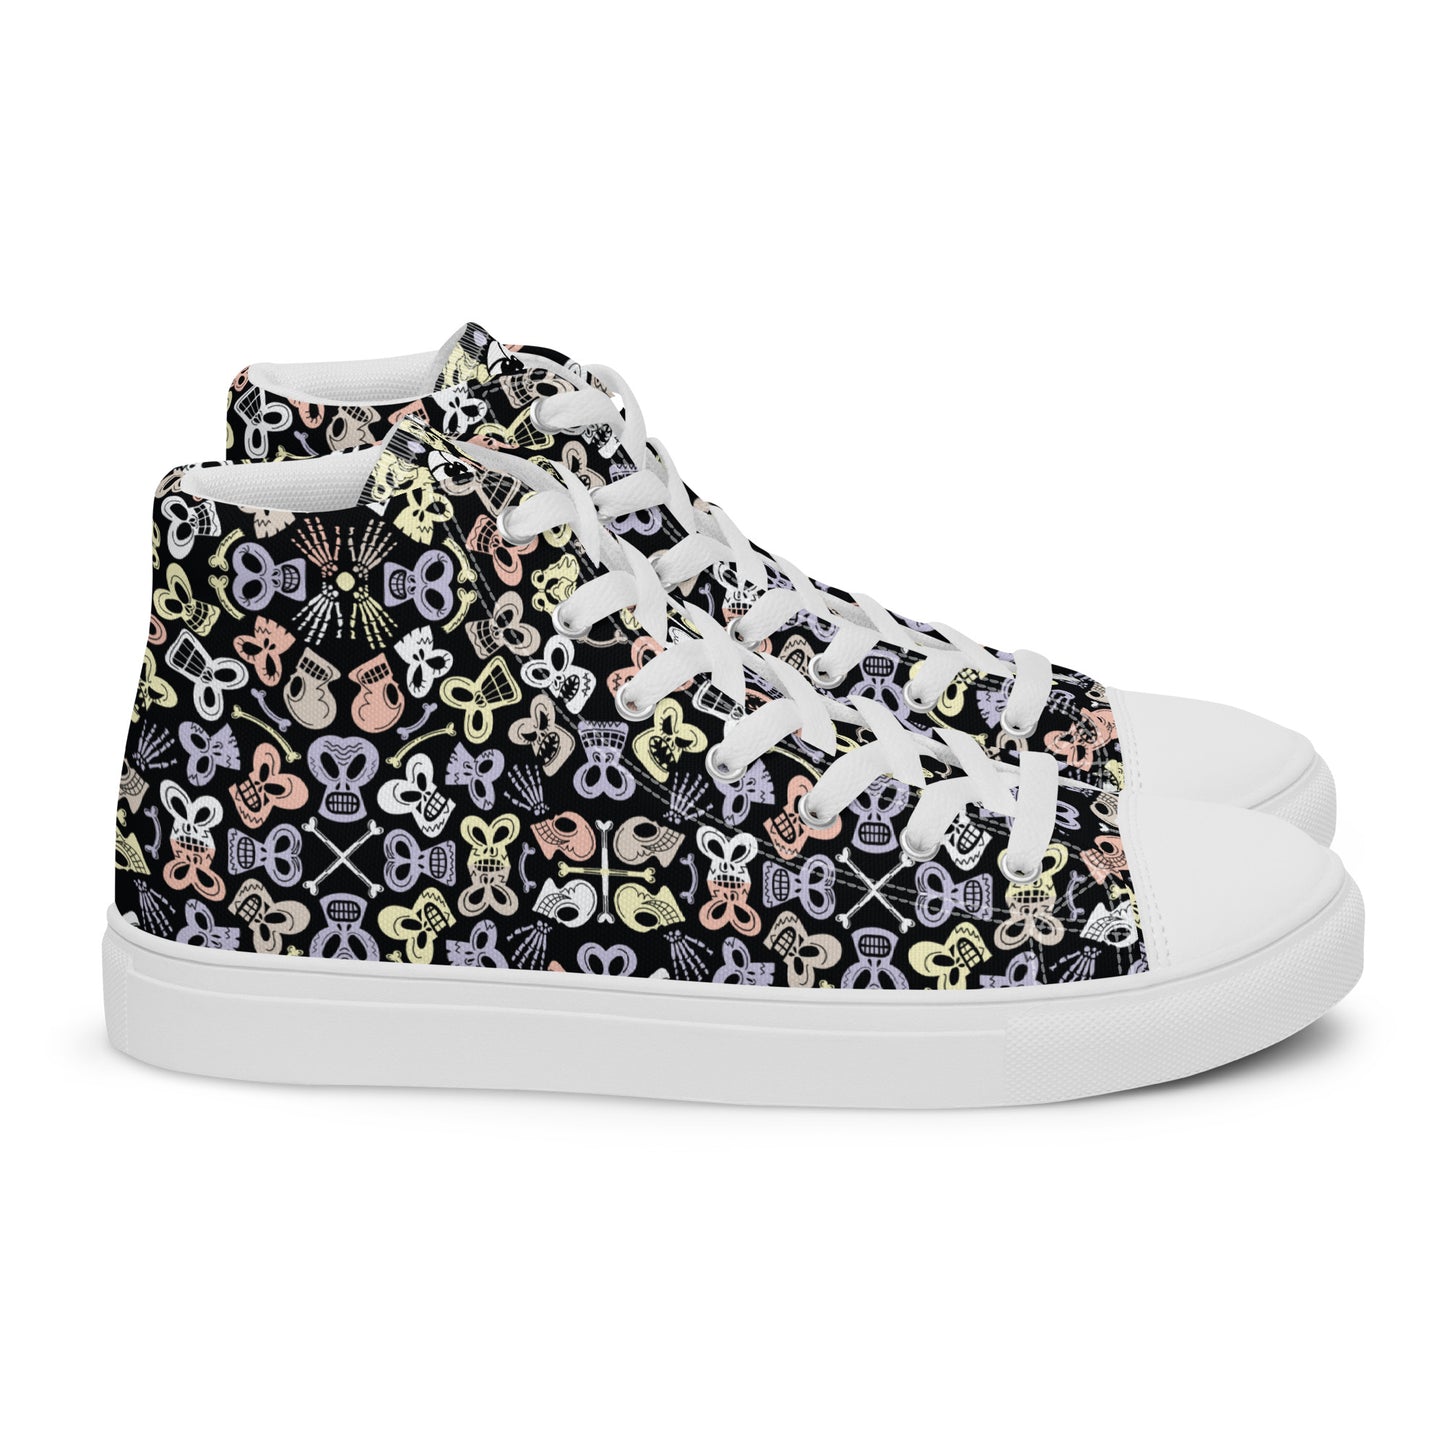 Bewitched Skulls: Hauntingly Chic Pattern Design - Women’s high top canvas shoes. White color. Side view